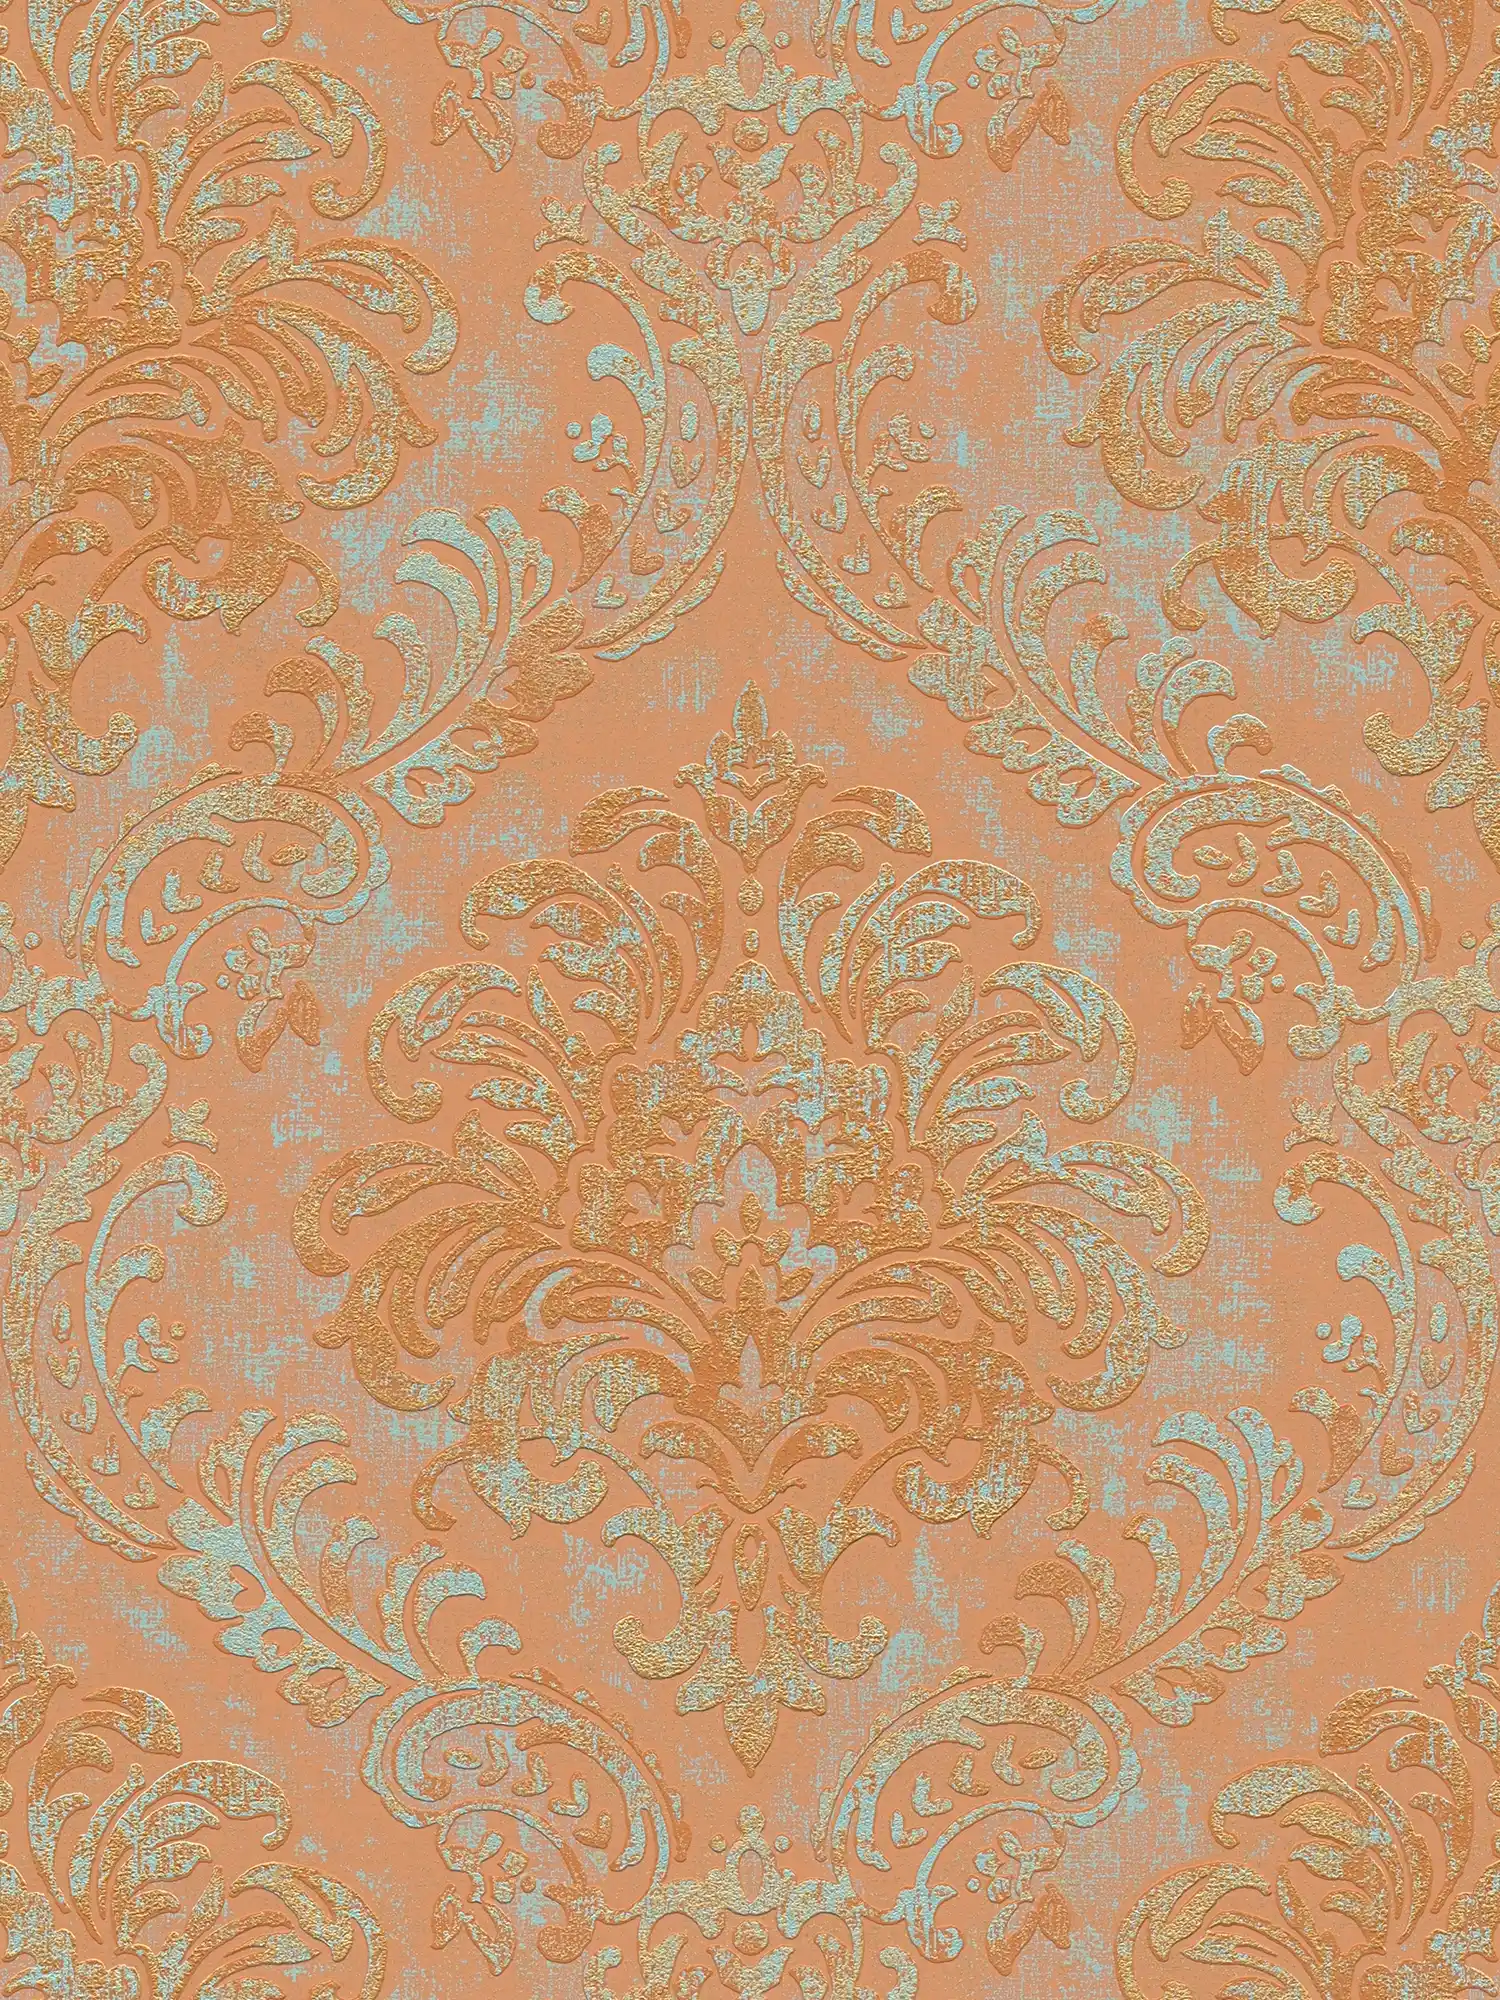 Metallic-look non-woven wallpaper with ornament - orange, pink, turquoise
